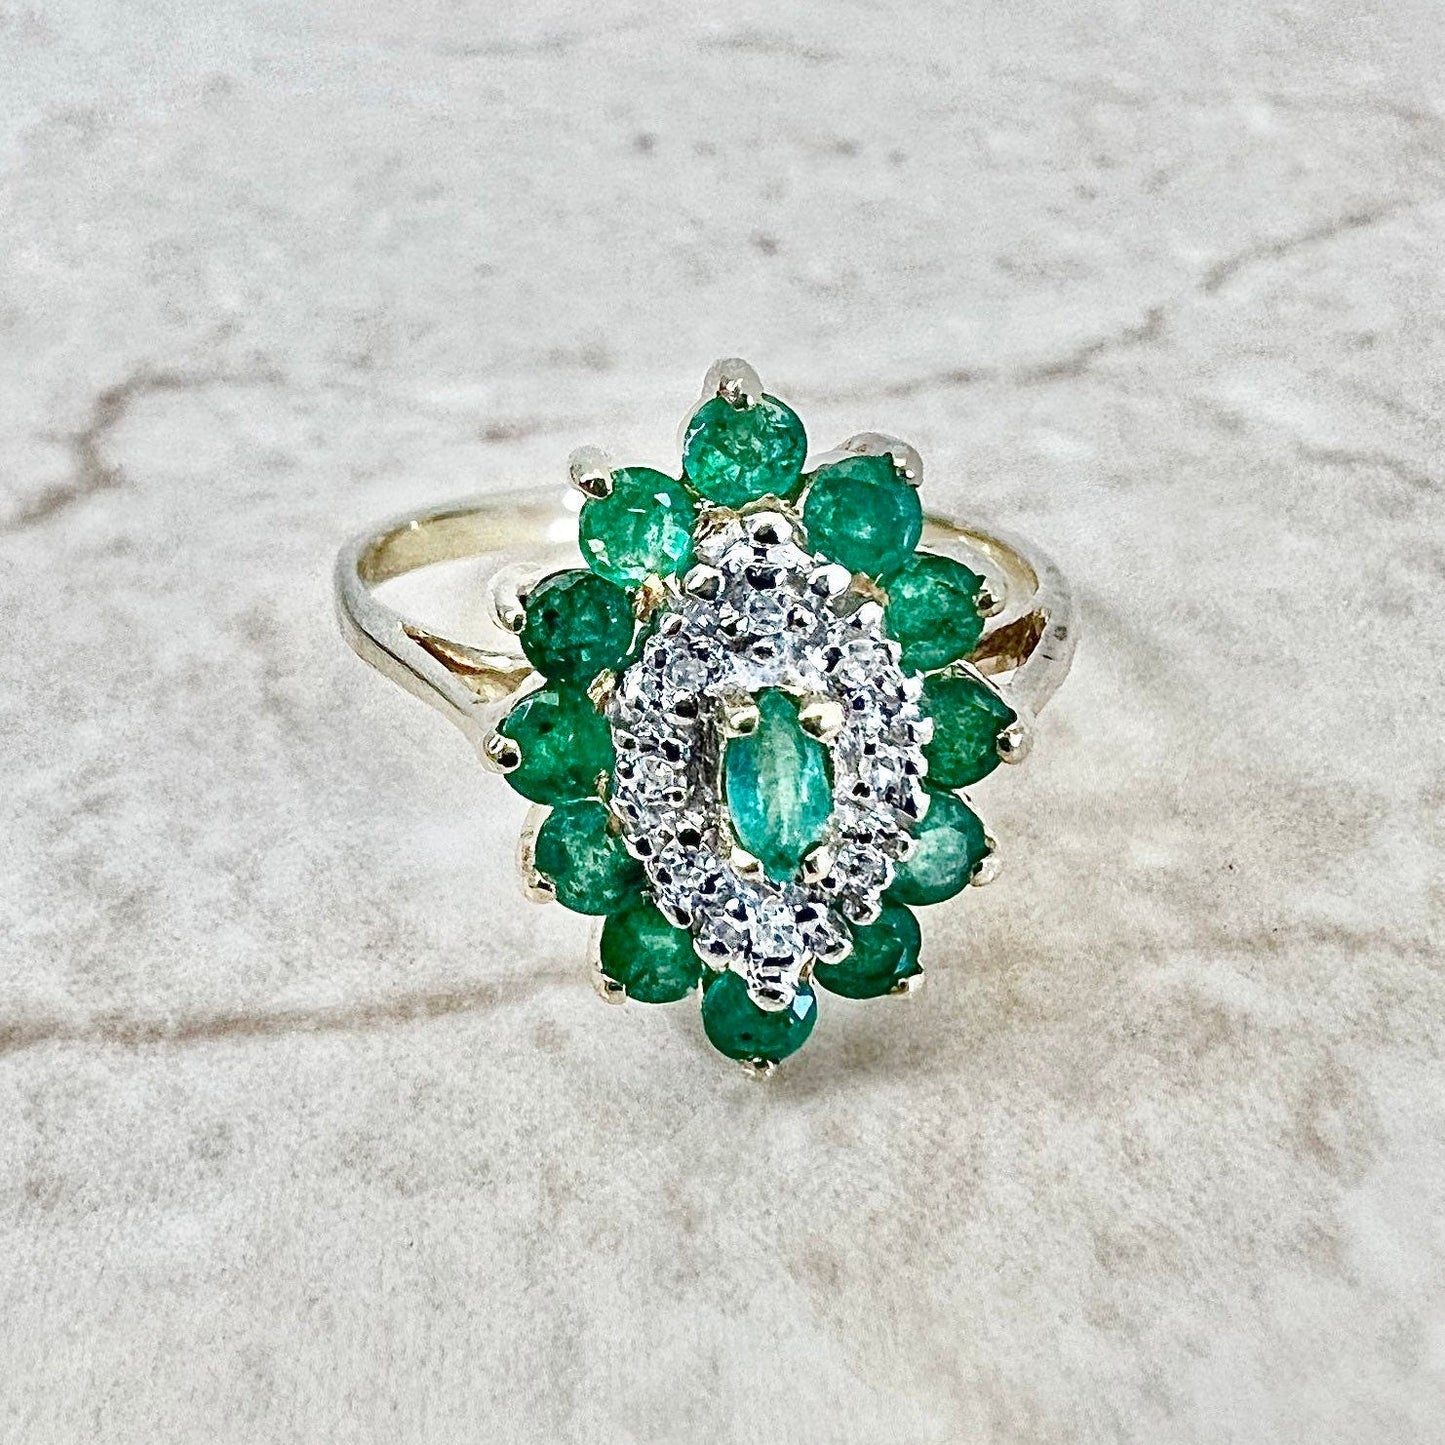 Vintage 10K Natural Emerald & Diamond Halo Ring - 2 Tone Gold Emerald Cocktail Ring - April May Birthstone - Birthday Gift For Her